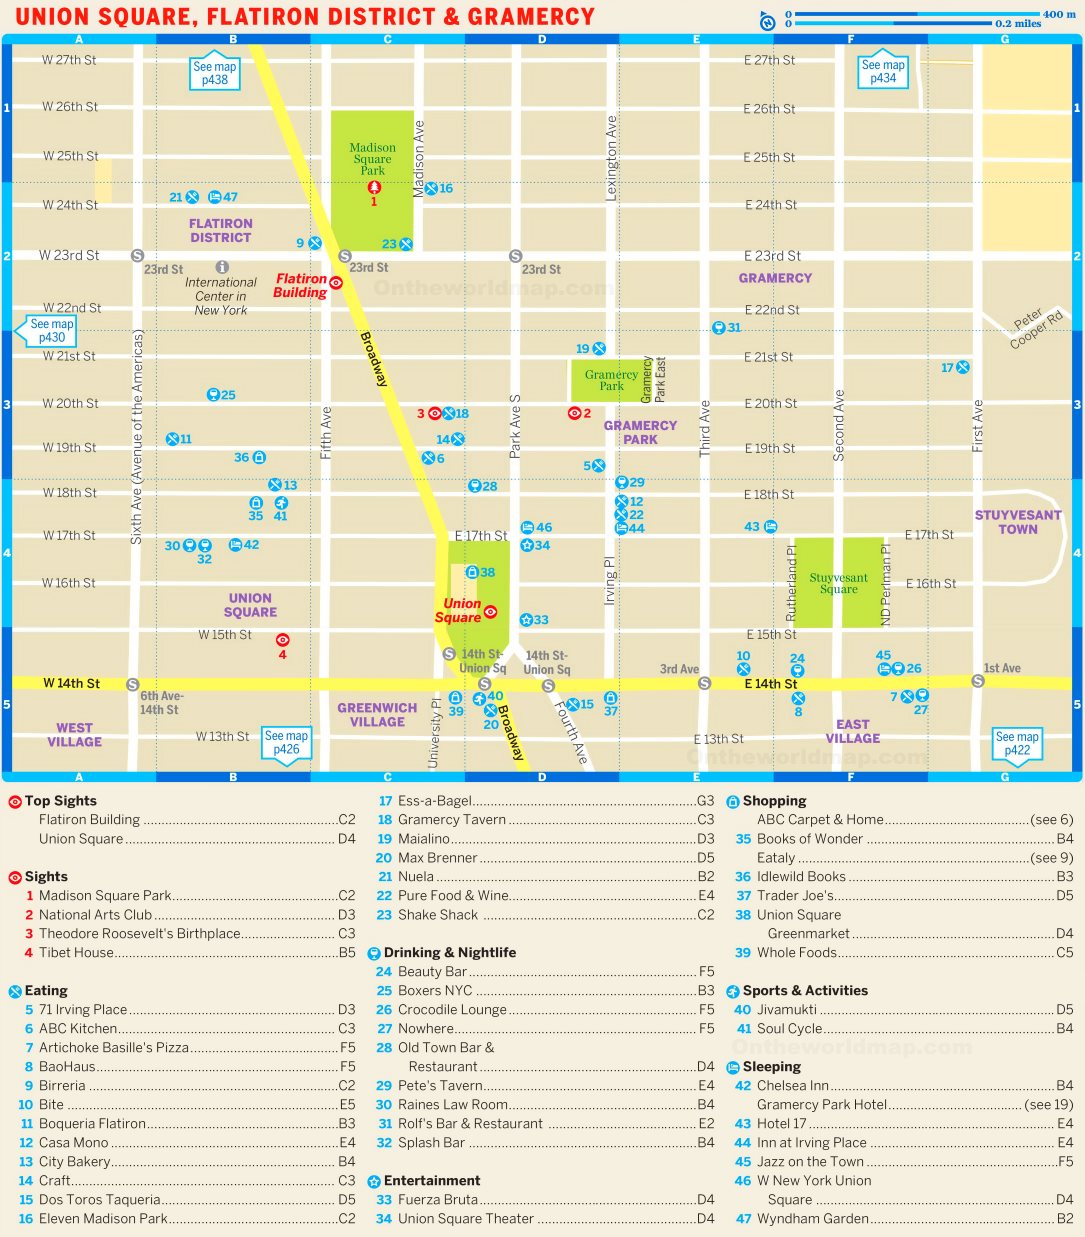 Map Of Union Square Flatiron District And Gramercy